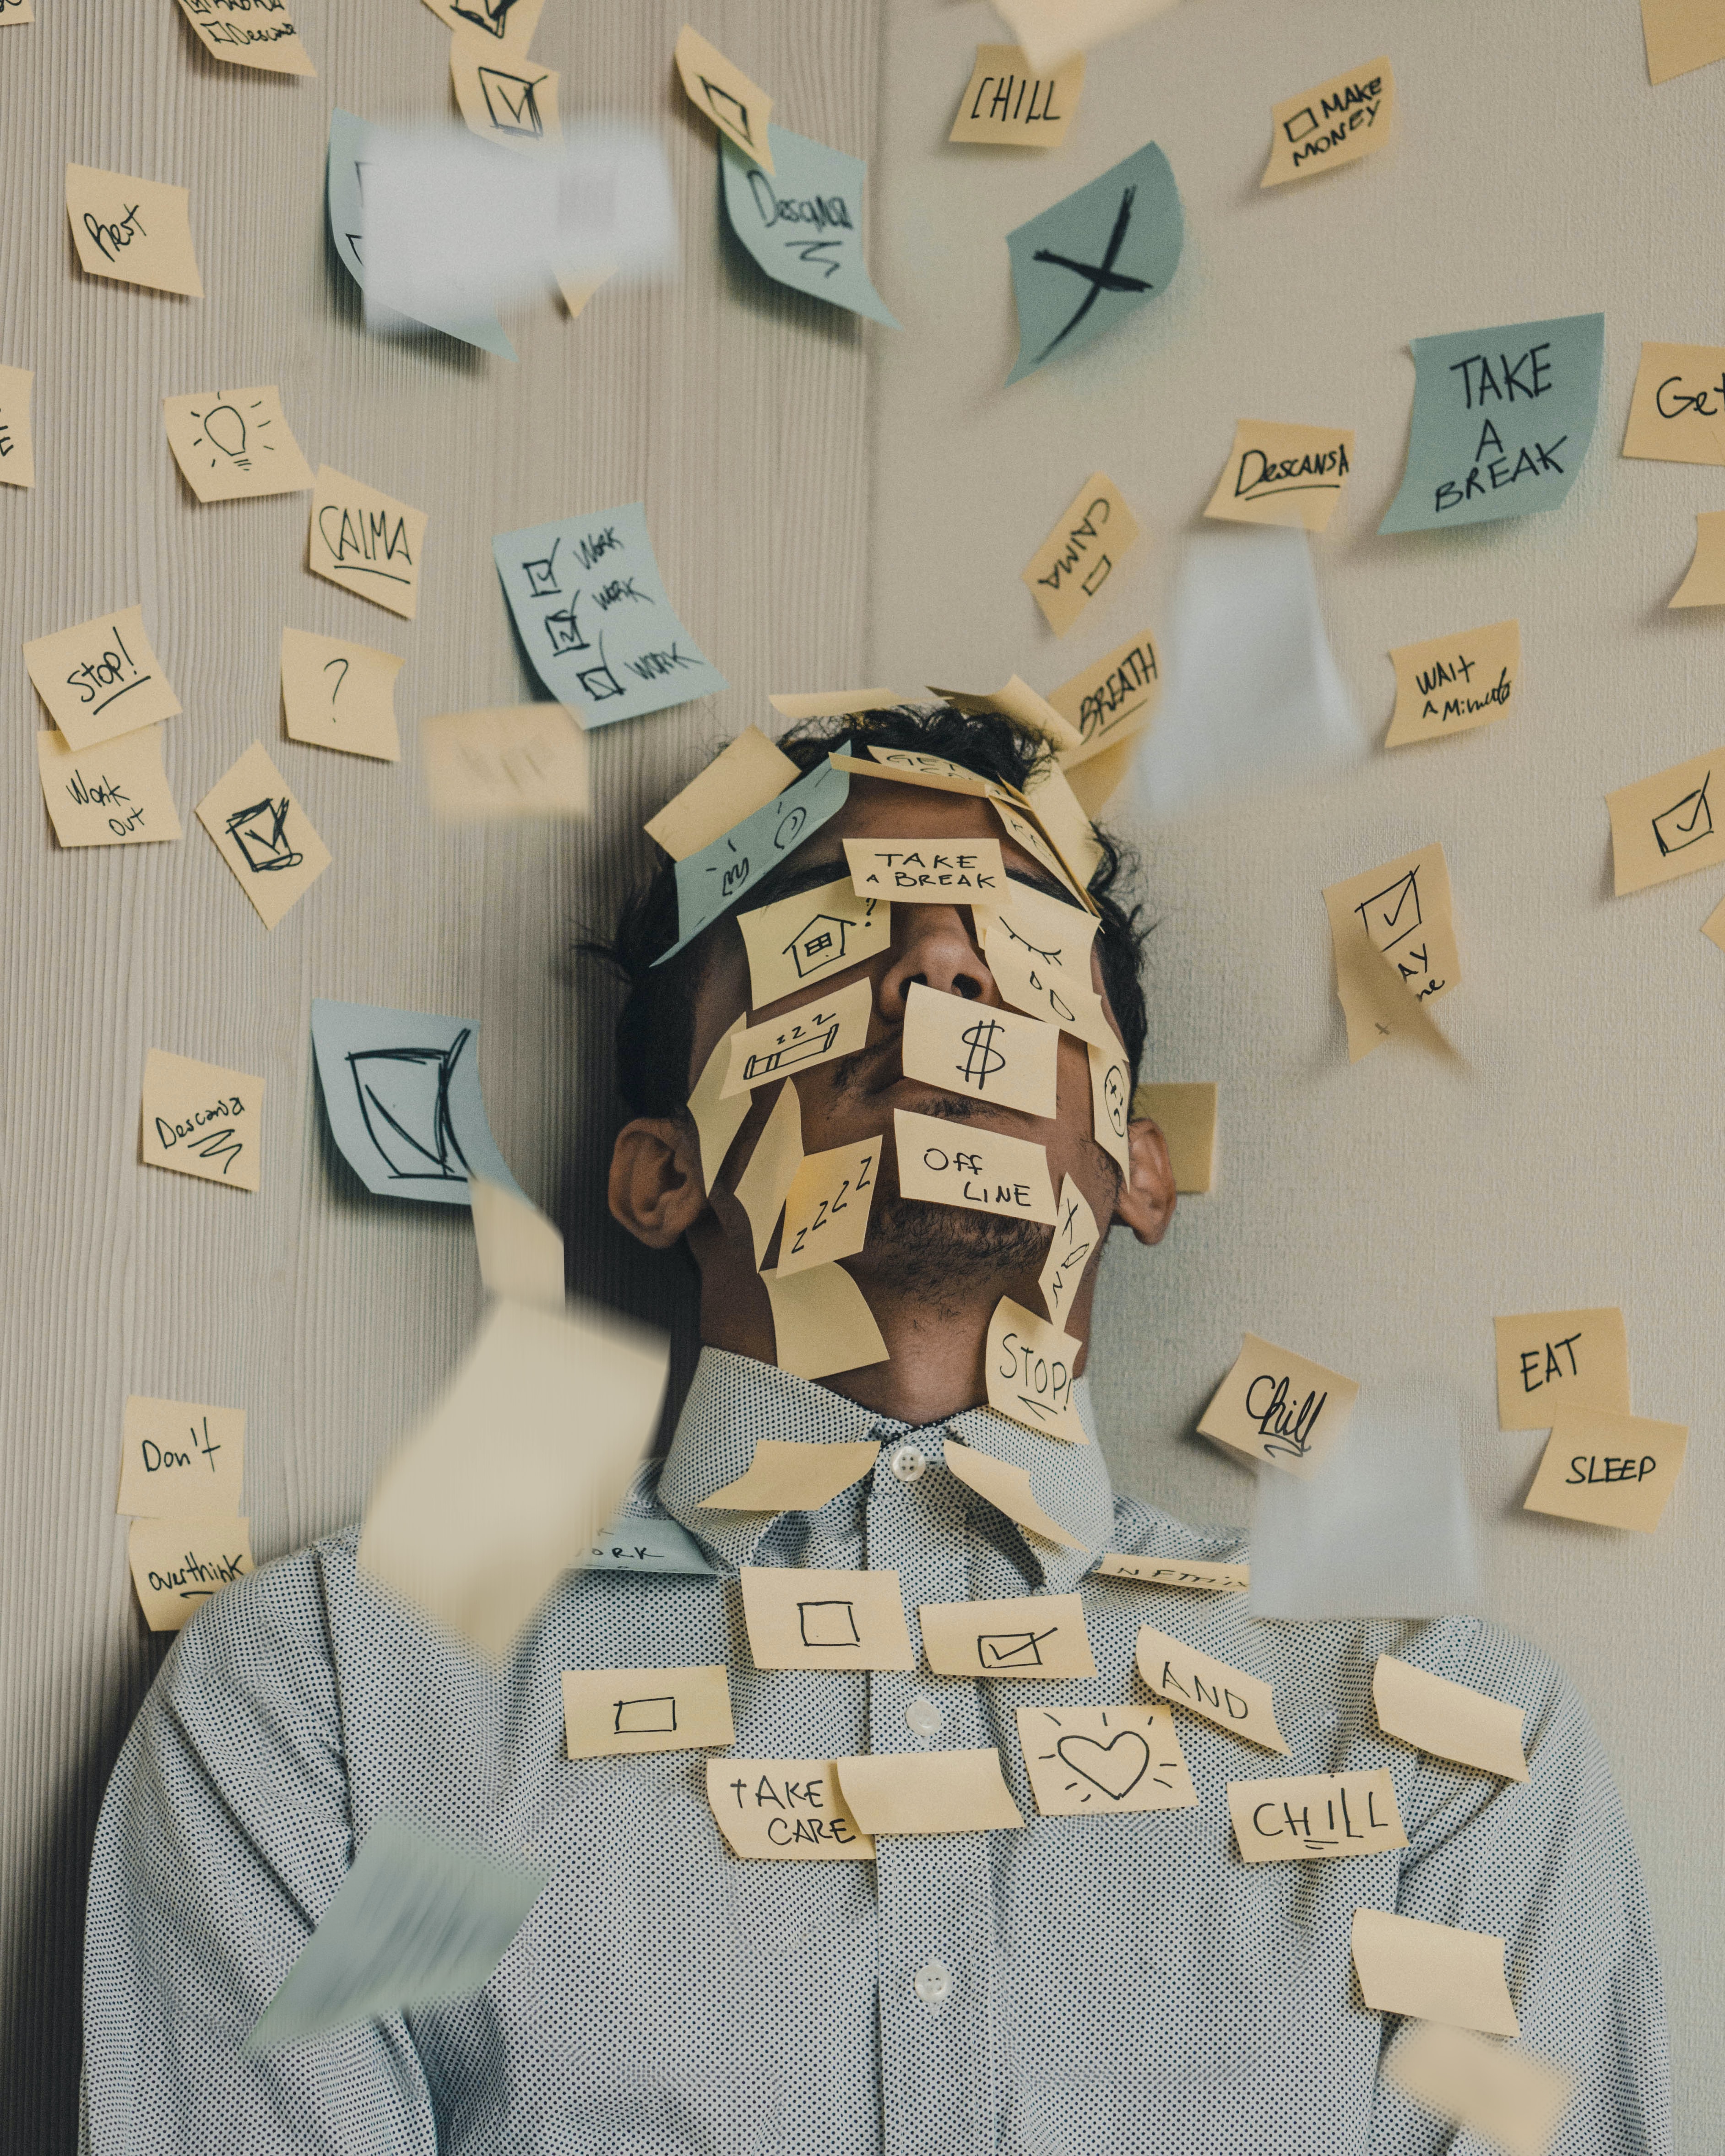 bored man covered in sticky notes not doing work